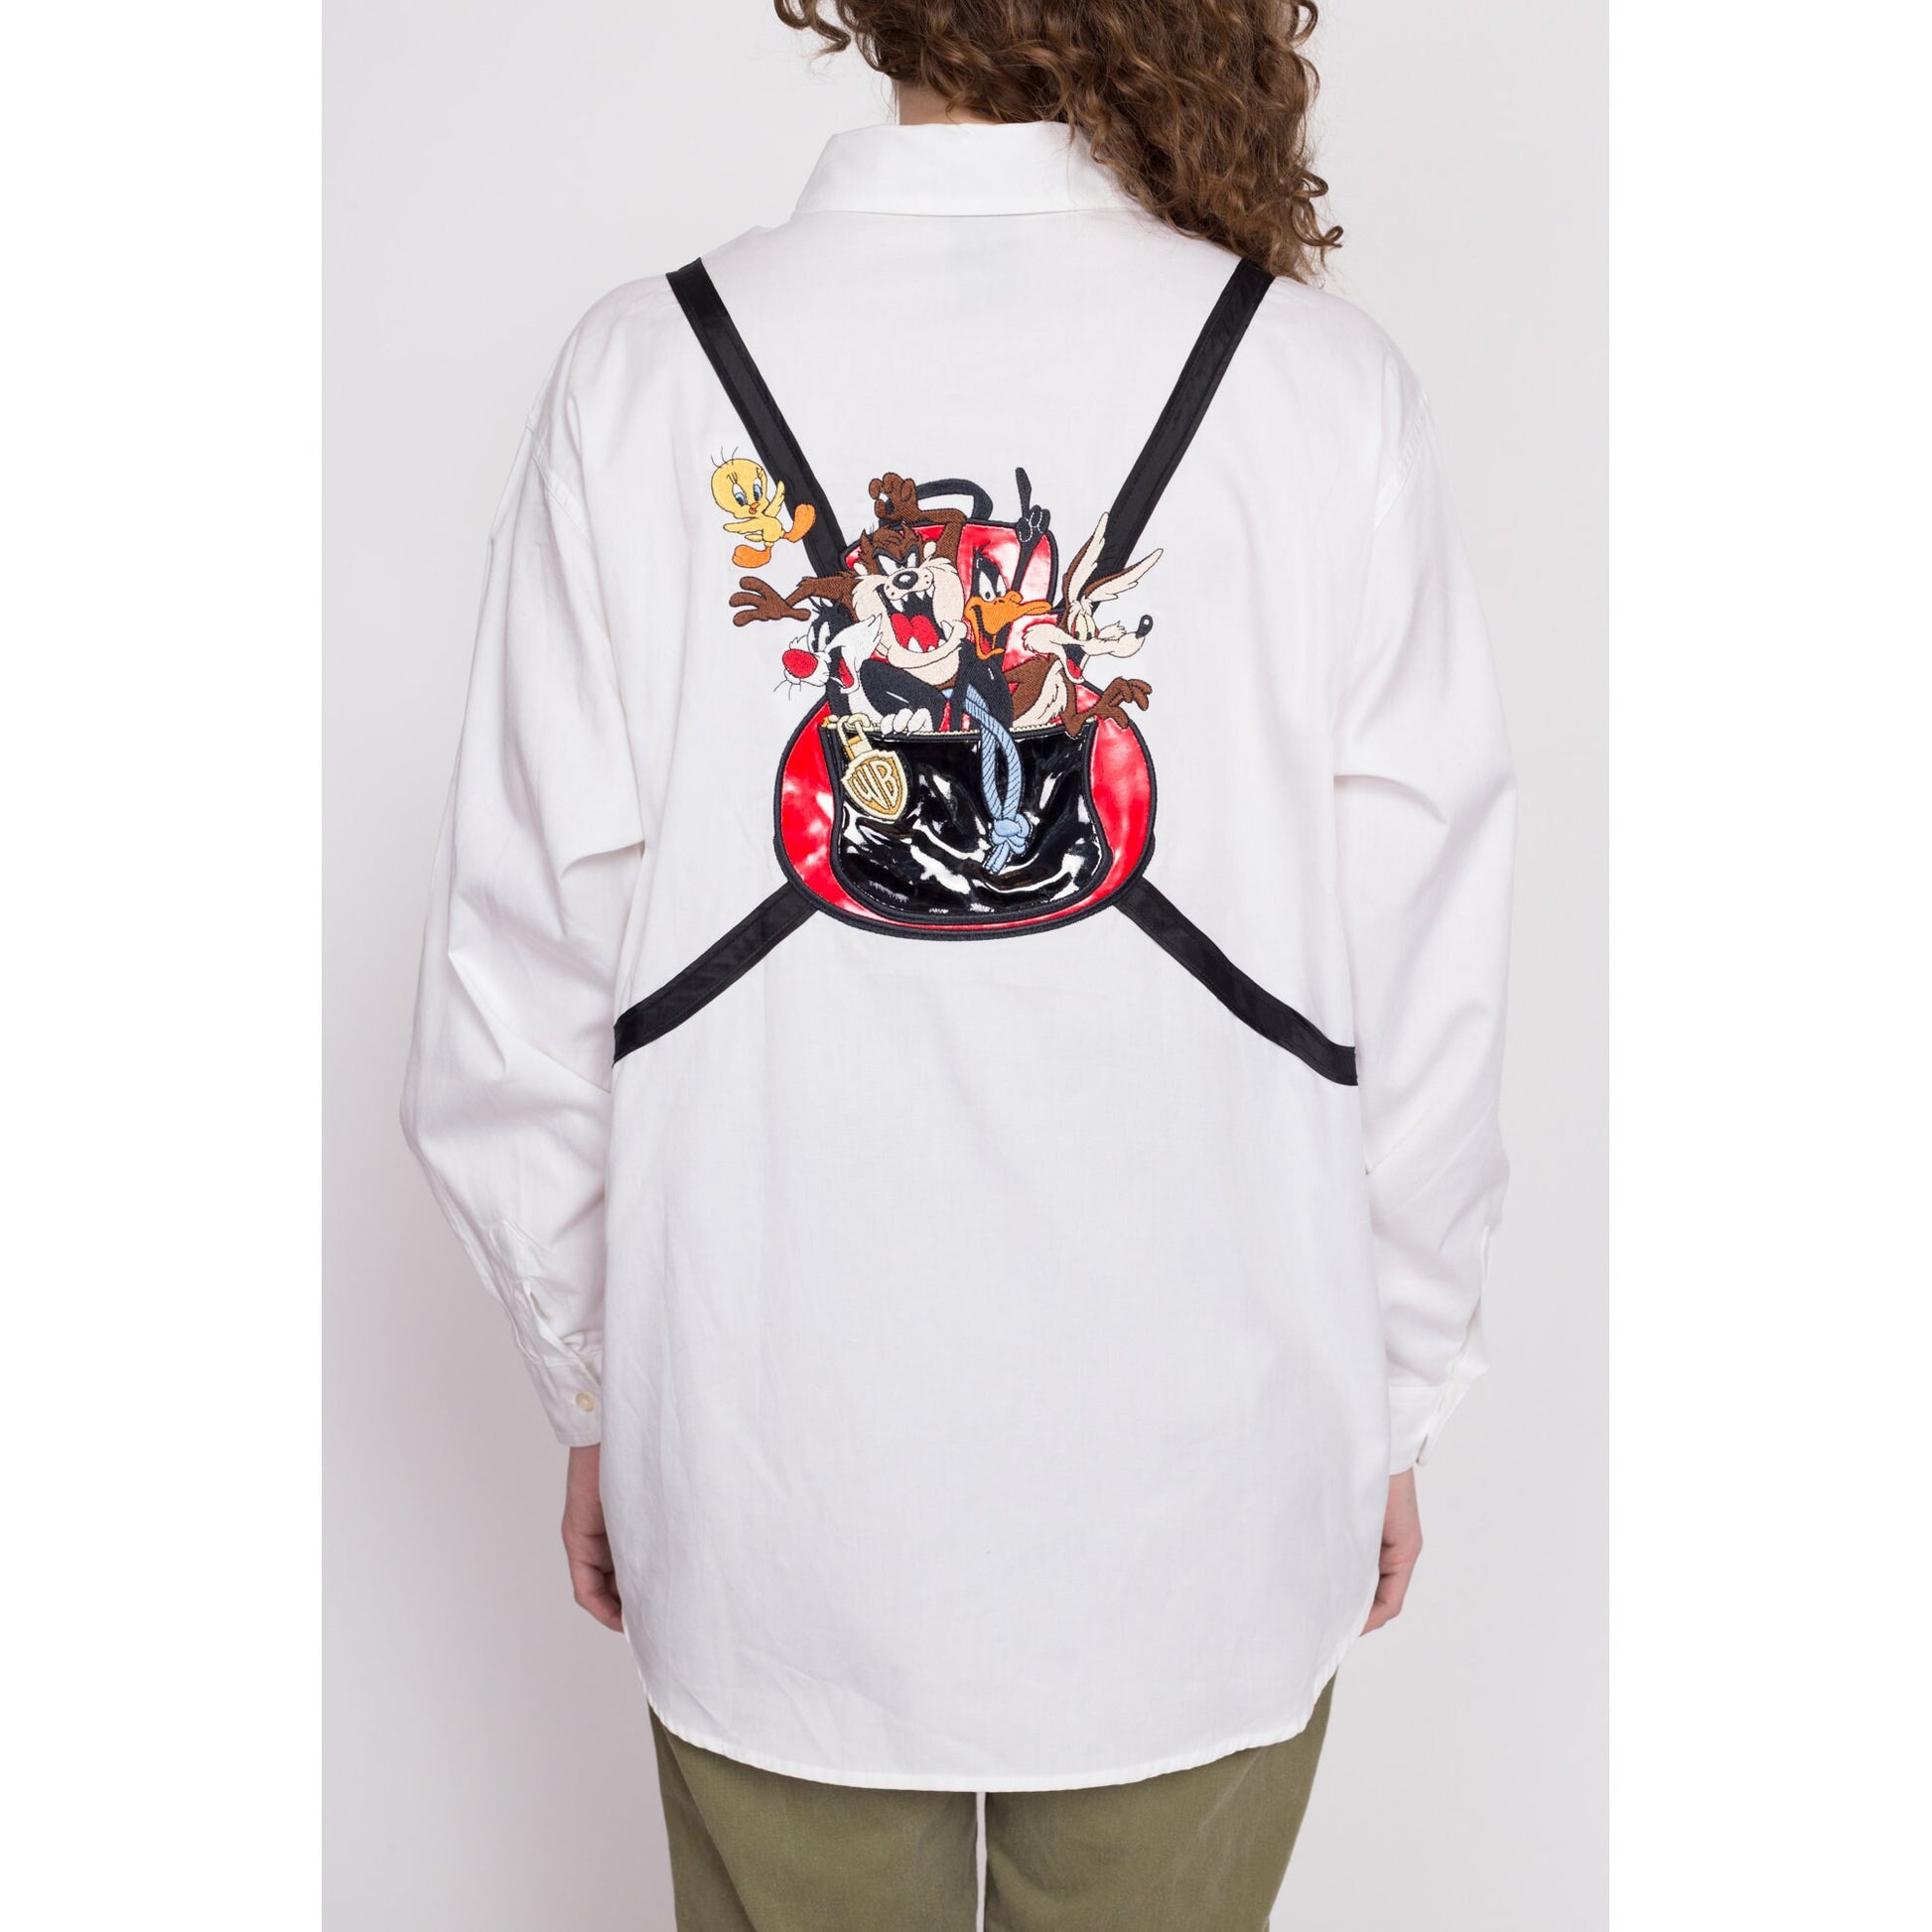 90s Looney Tunes Backpack Shirt - Large | Vintage White Button Up Collared Long Sleeve Novelty Top